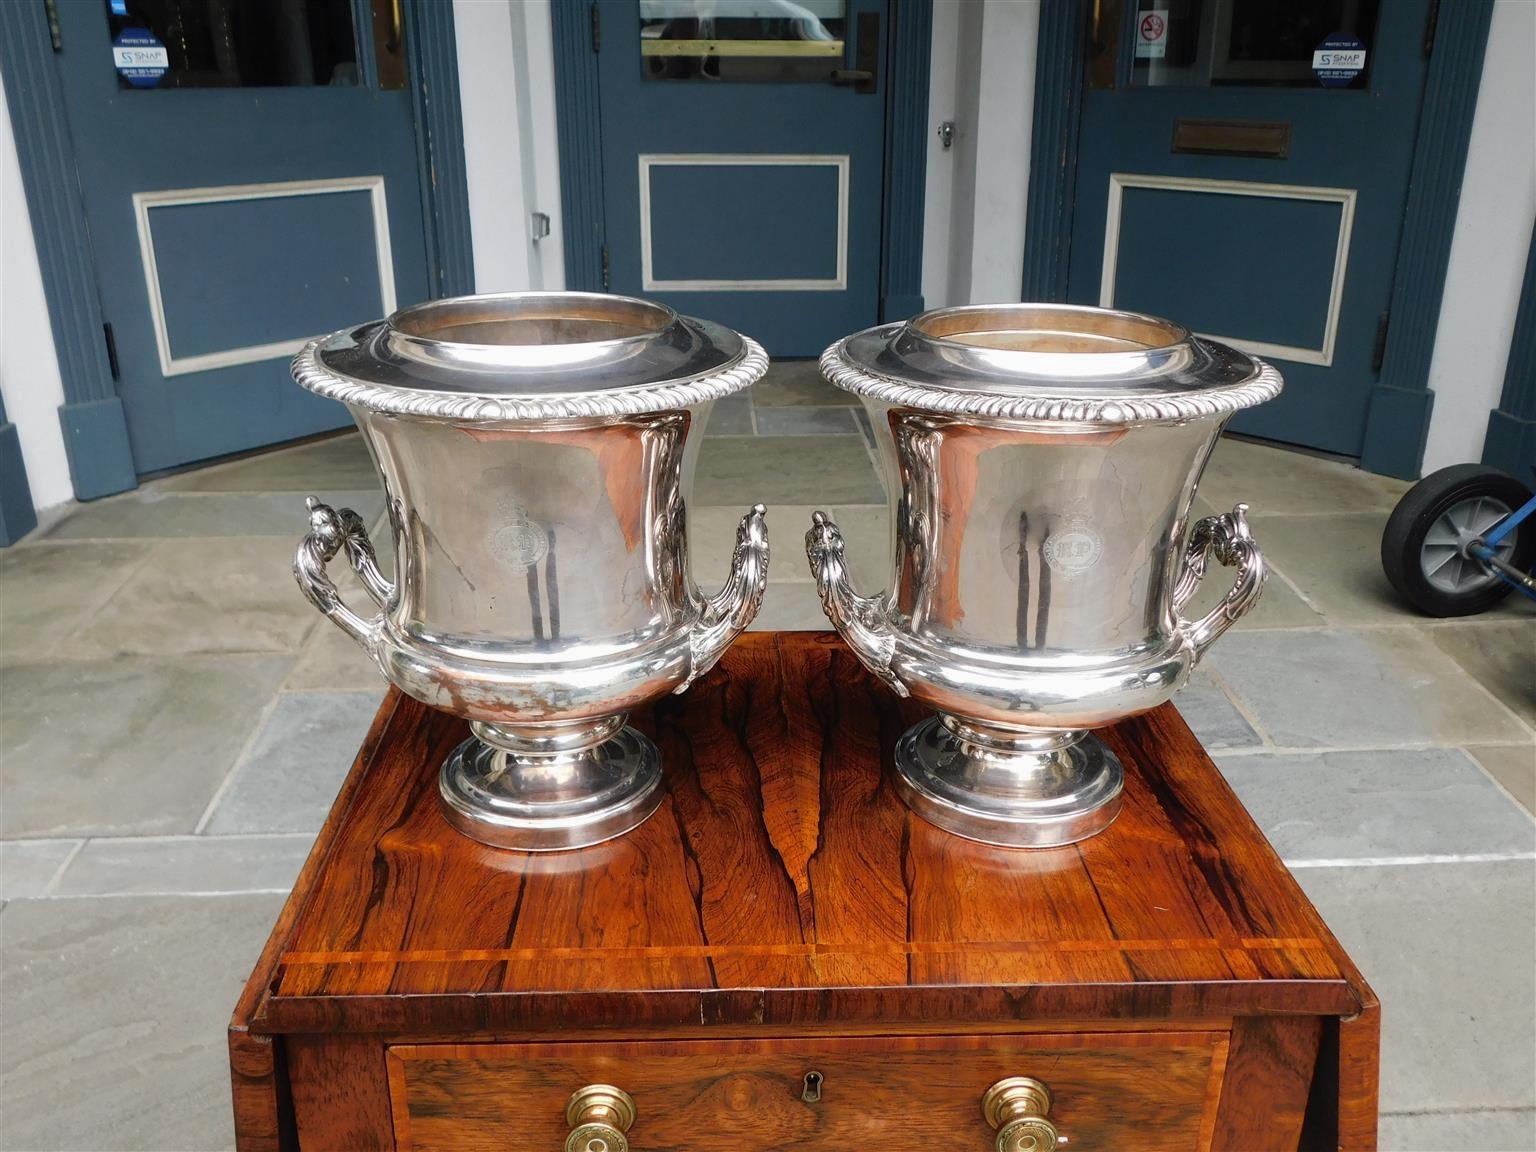 Pair of English Sheffield engraved urn form champagne buckets with gadrooned molded rims, removable interior liners, flanking acanthus side handles, and resting on step back molded edge bases, Early 19th century. Stamped by makers hallmarks double